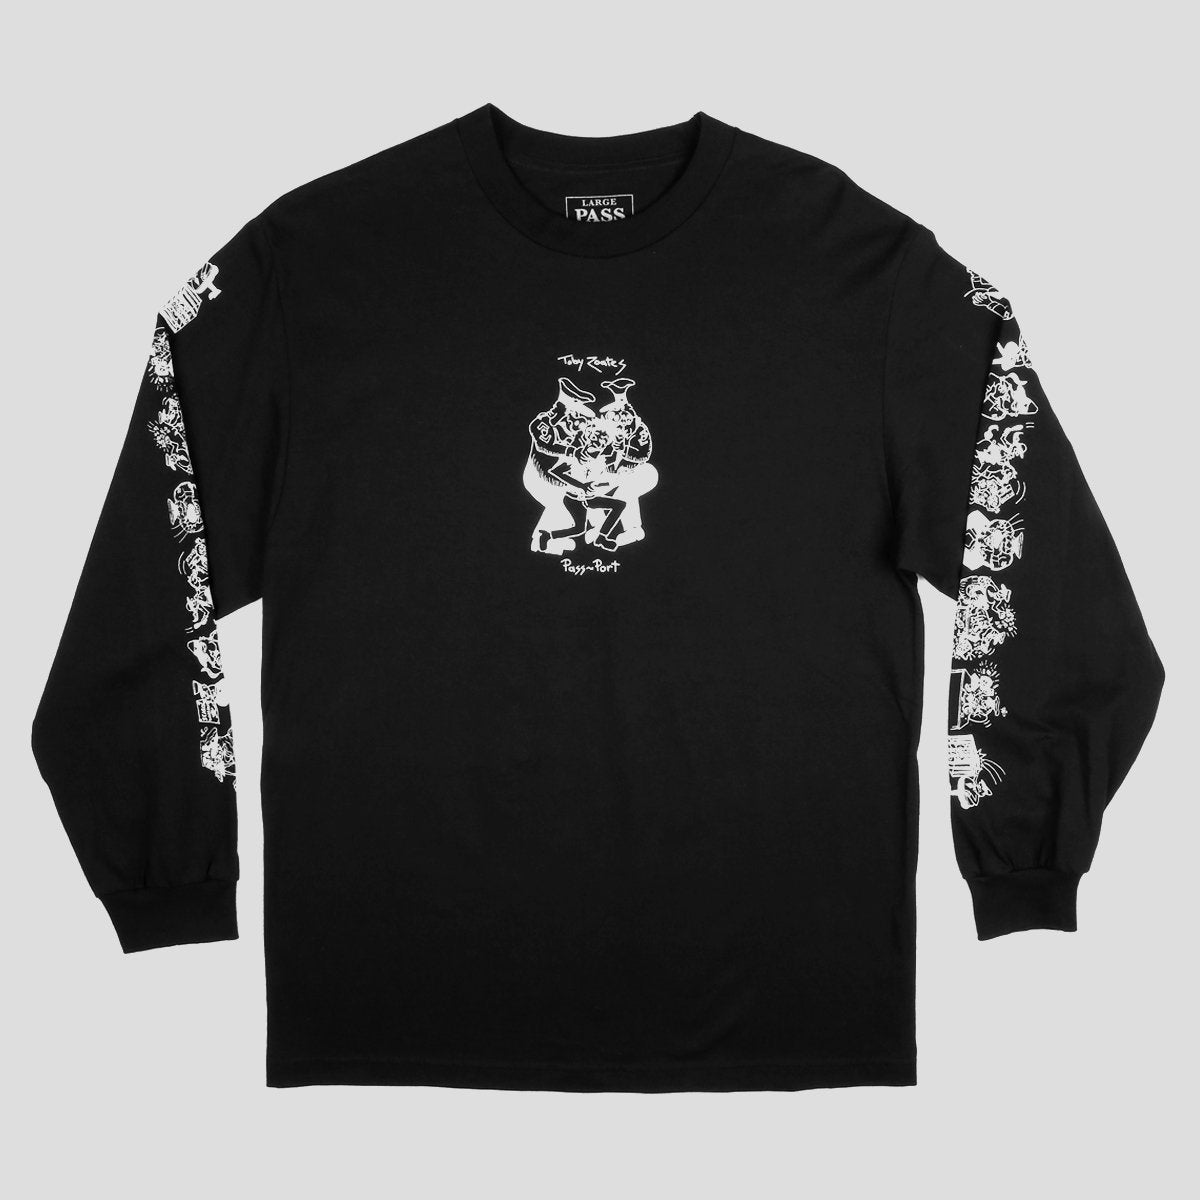 PASS~PORT TOBY ZOATES "COPPERS" L/S TEE BLACK